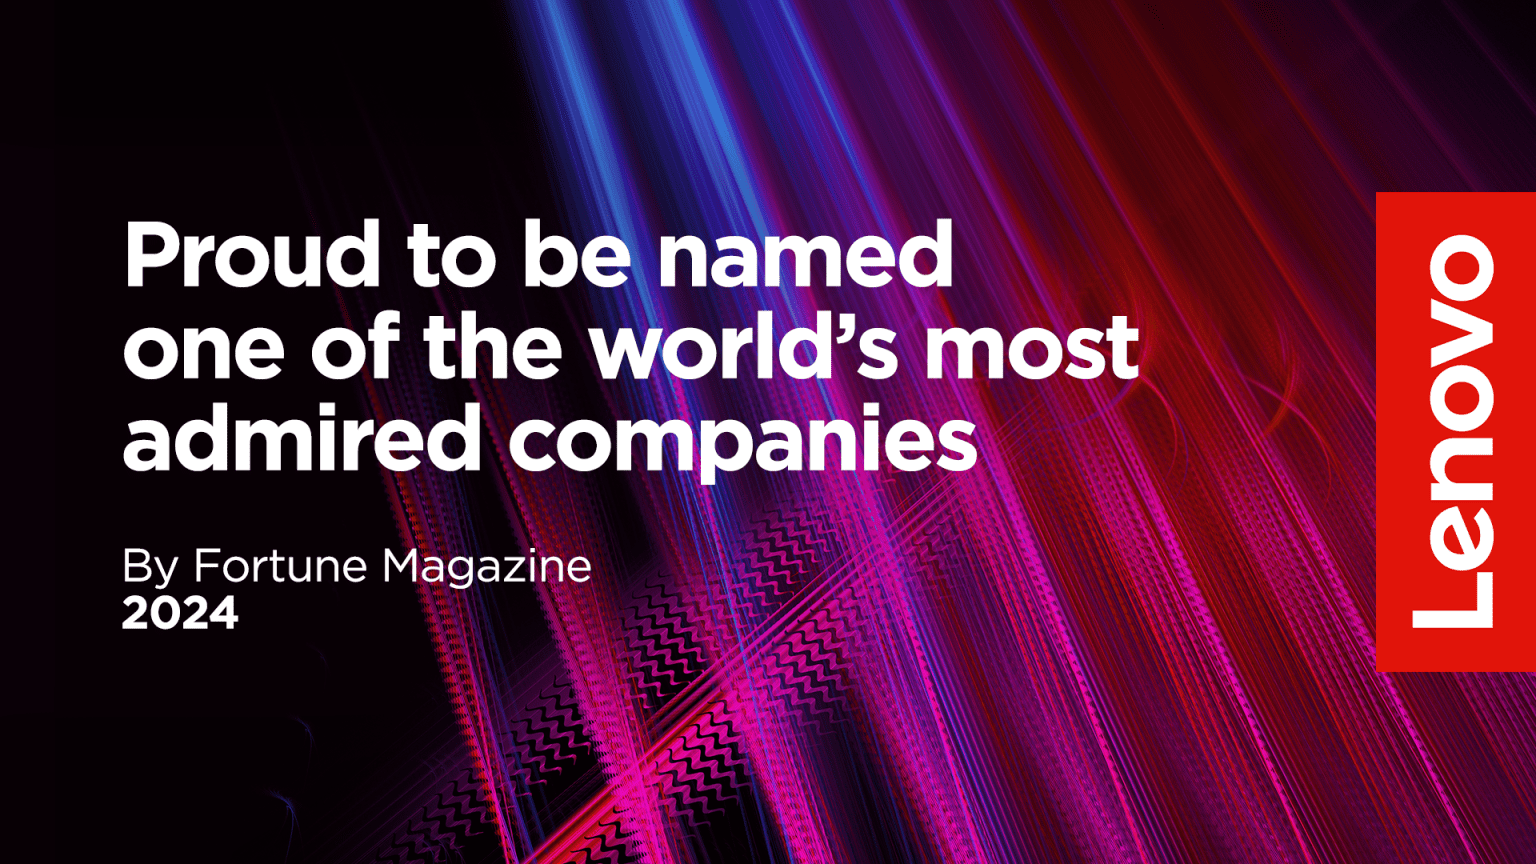 Lenovo Named by Fortune as One of the World’s Most Admired Companies